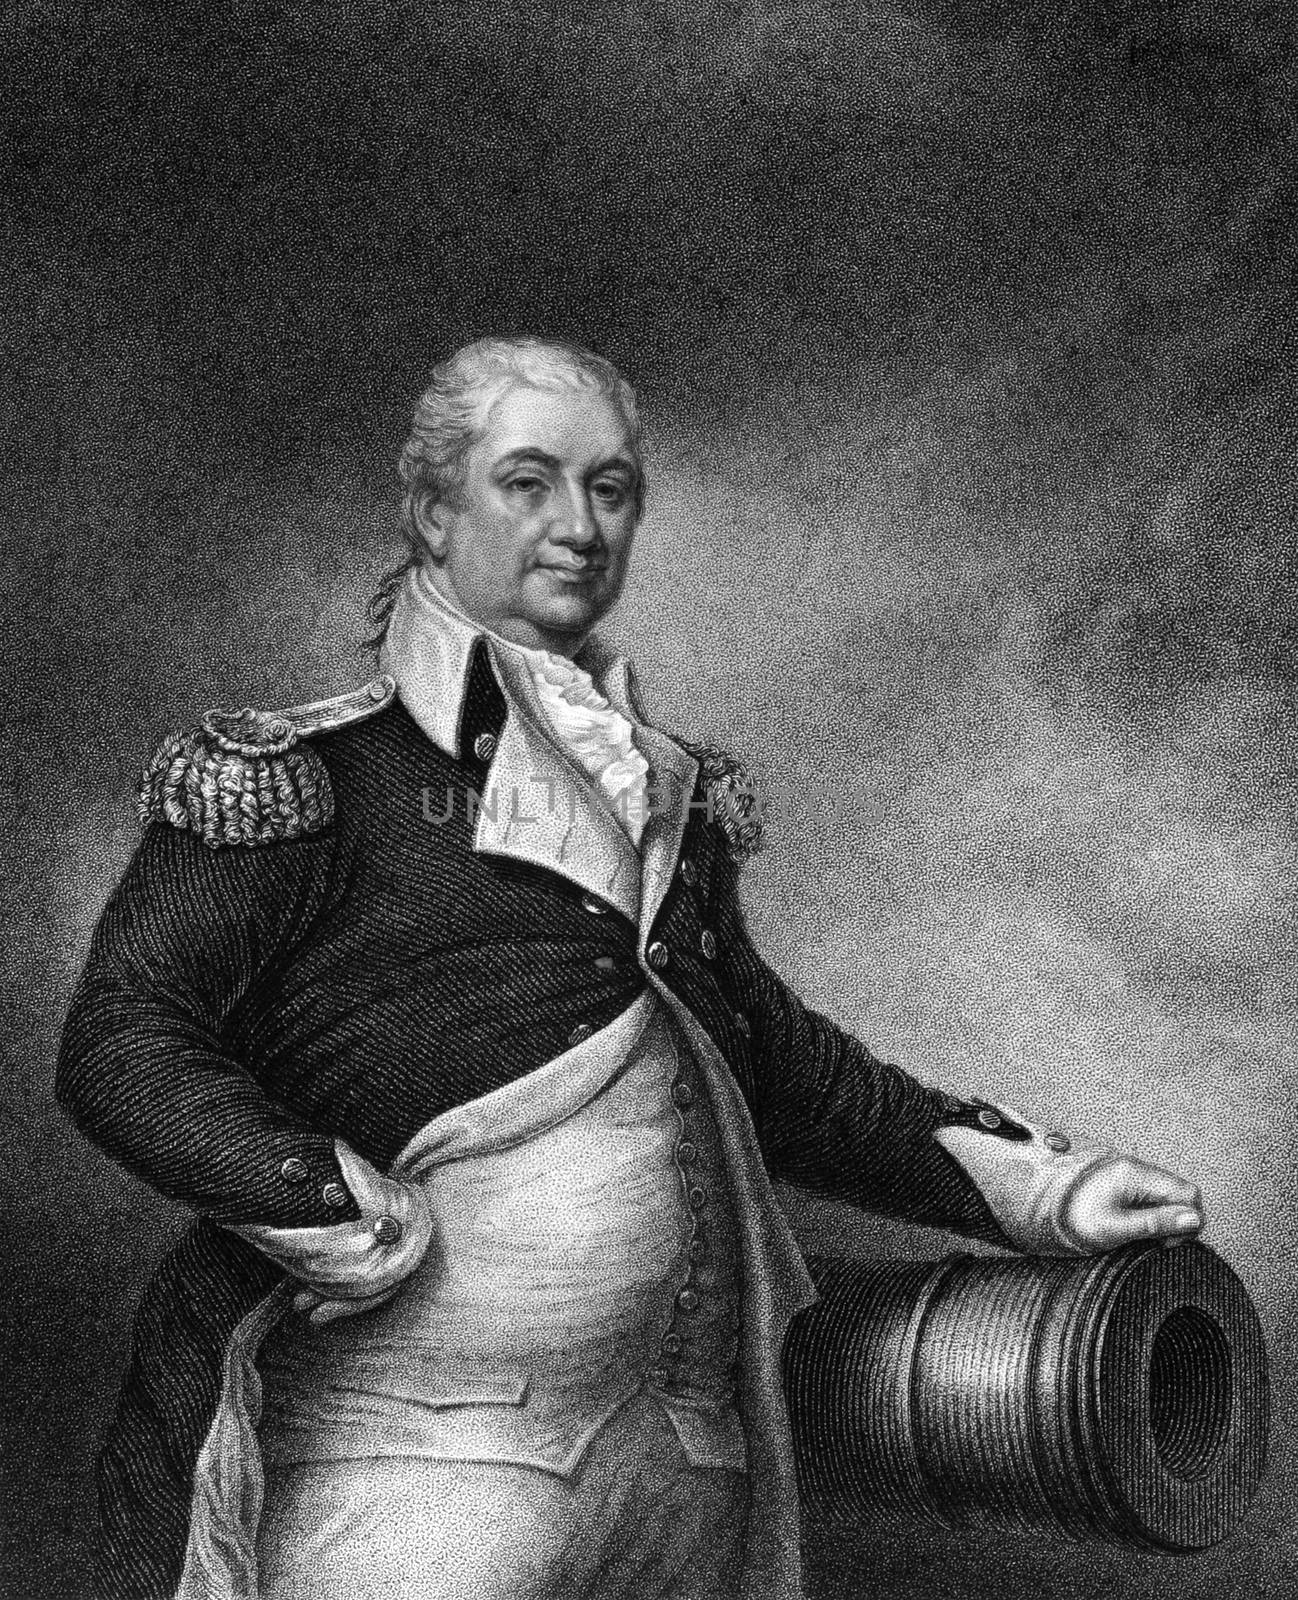 Henry Knox (1750-1806) on engraving from 1835. Military officer of the Continental Army and later the United States Army. Engraved by E.Prudhomme and published in ''National Portrait Gallery of Distinguished Americans Volume II'',USA,1835.